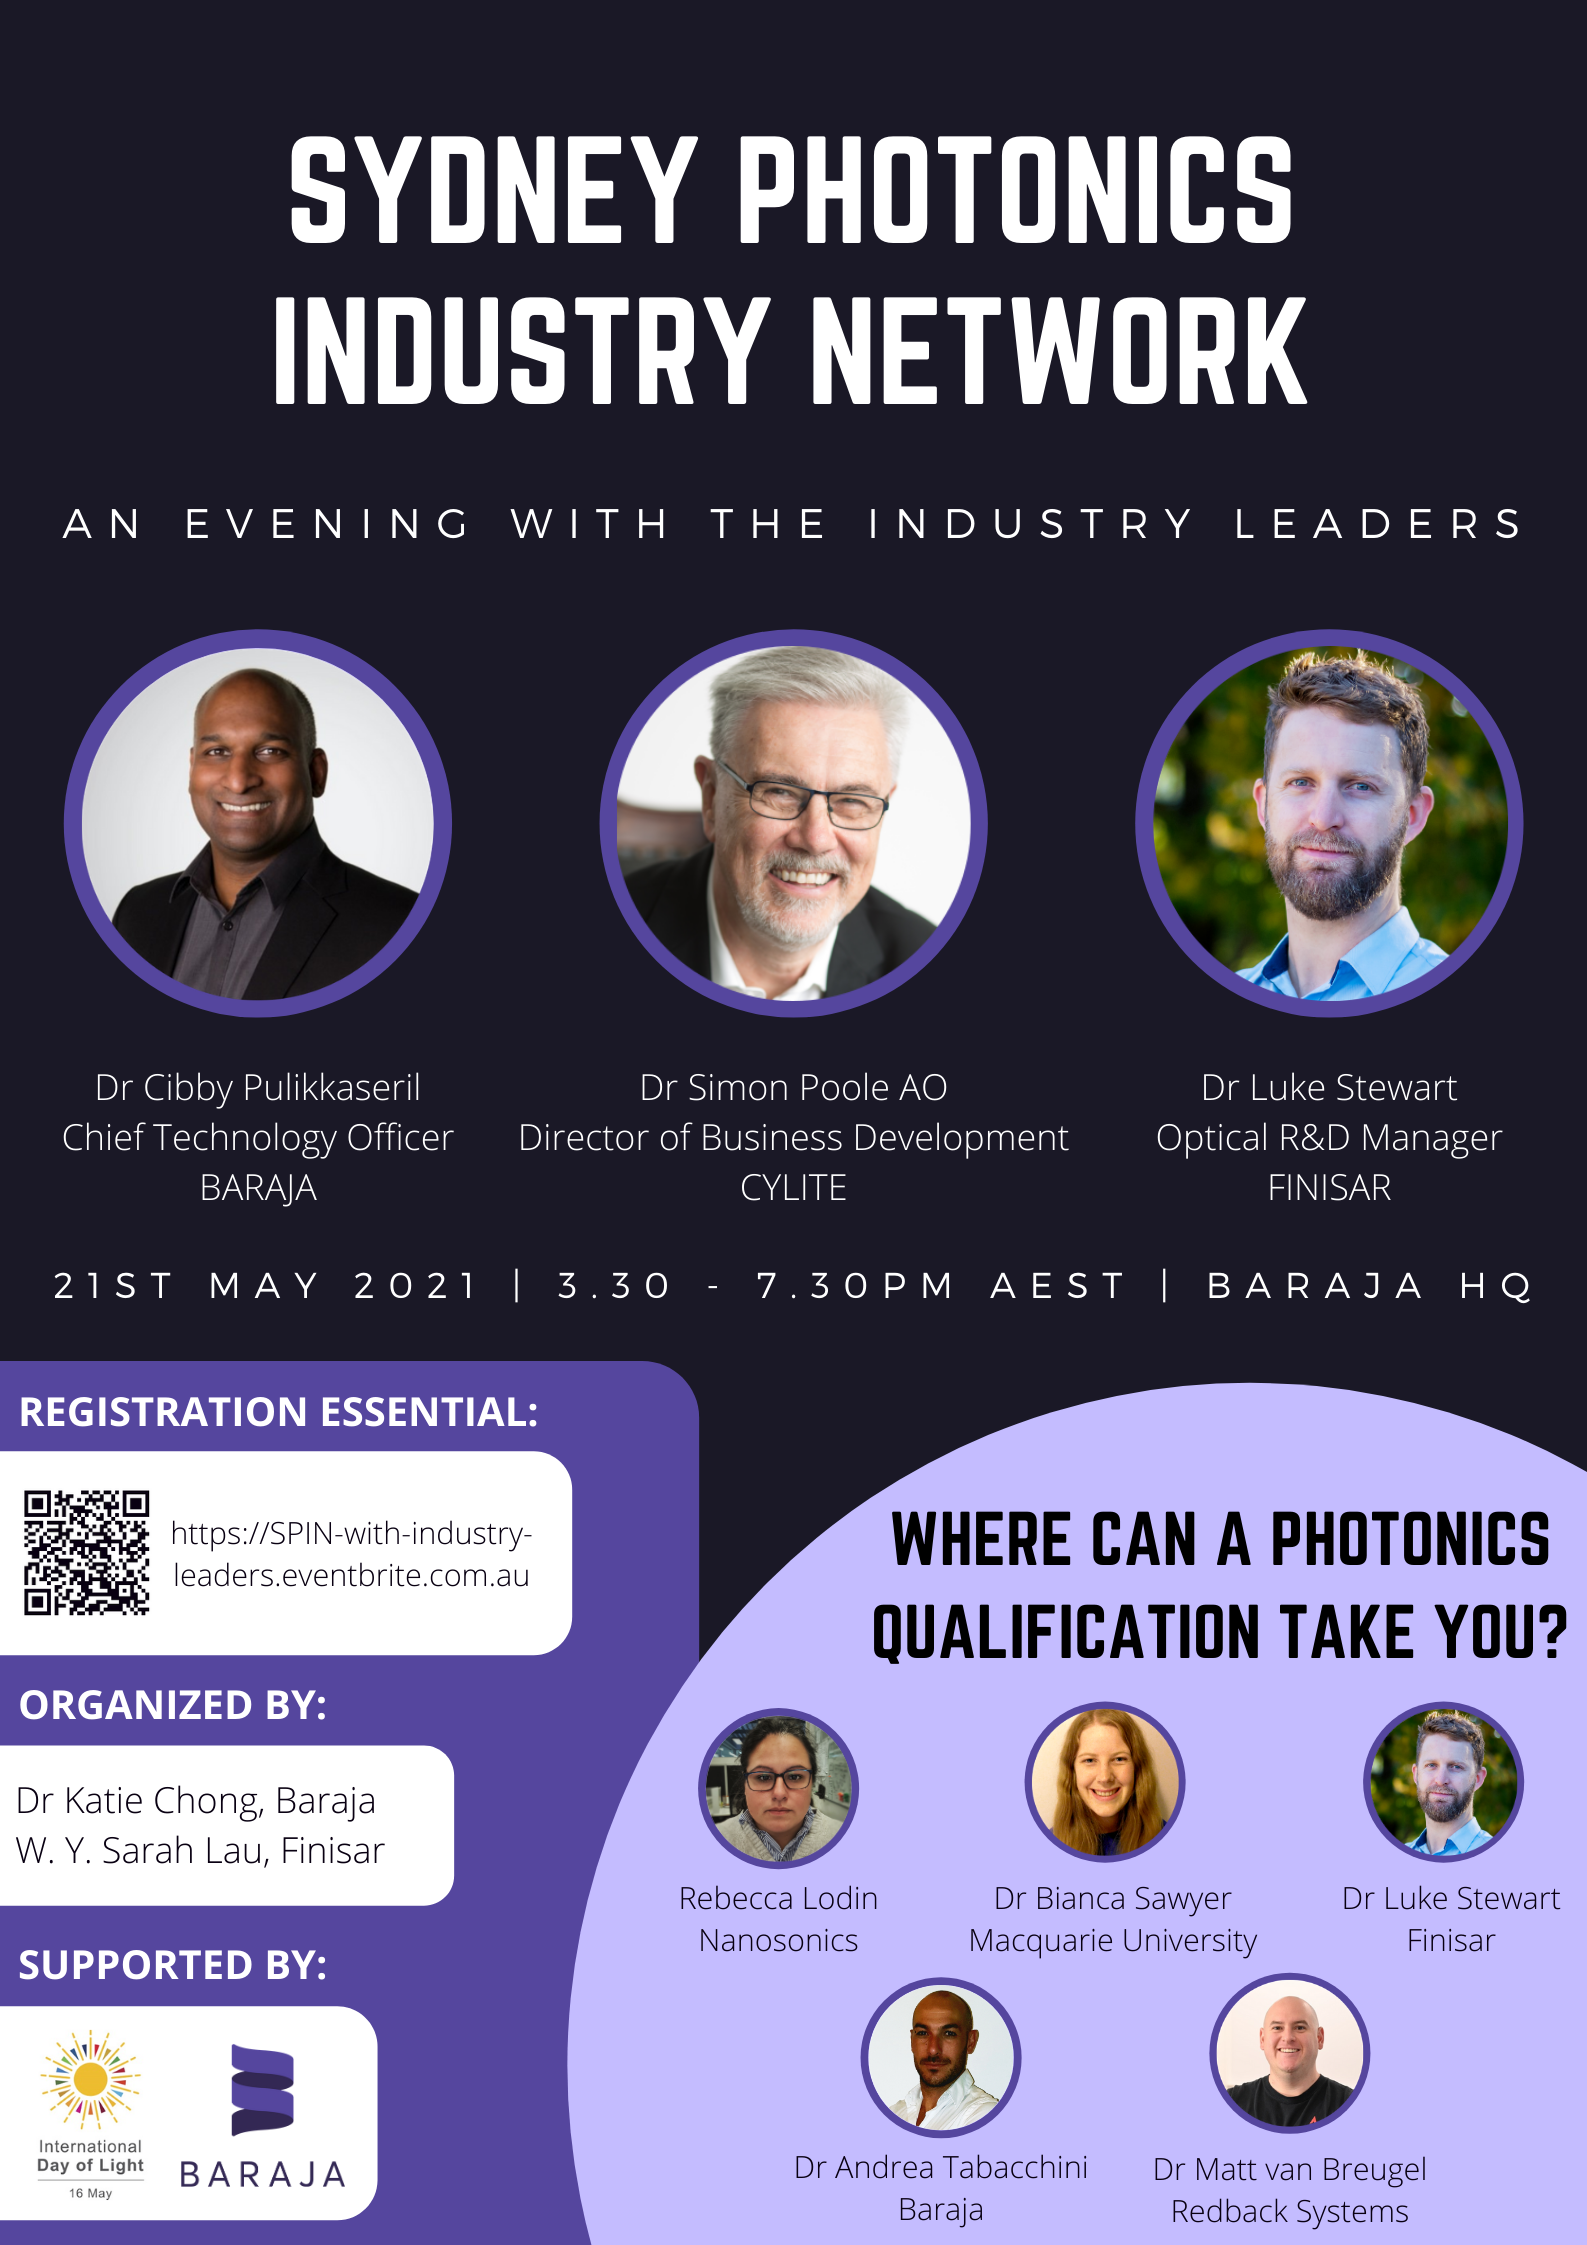 An Evening with the Industry Leaders